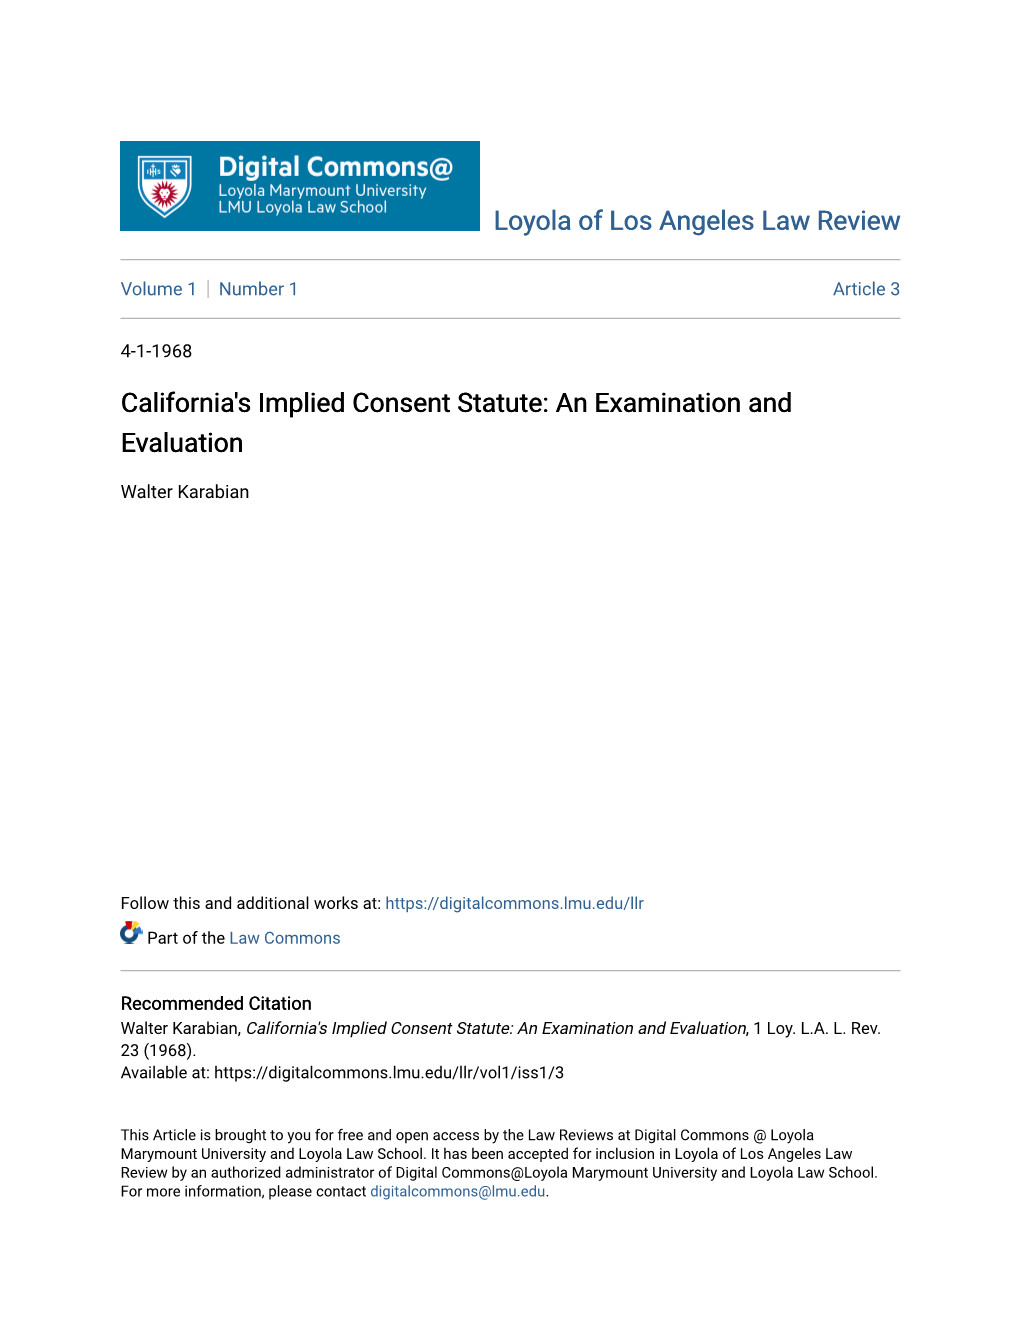 California's Implied Consent Statute: an Examination and Evaluation